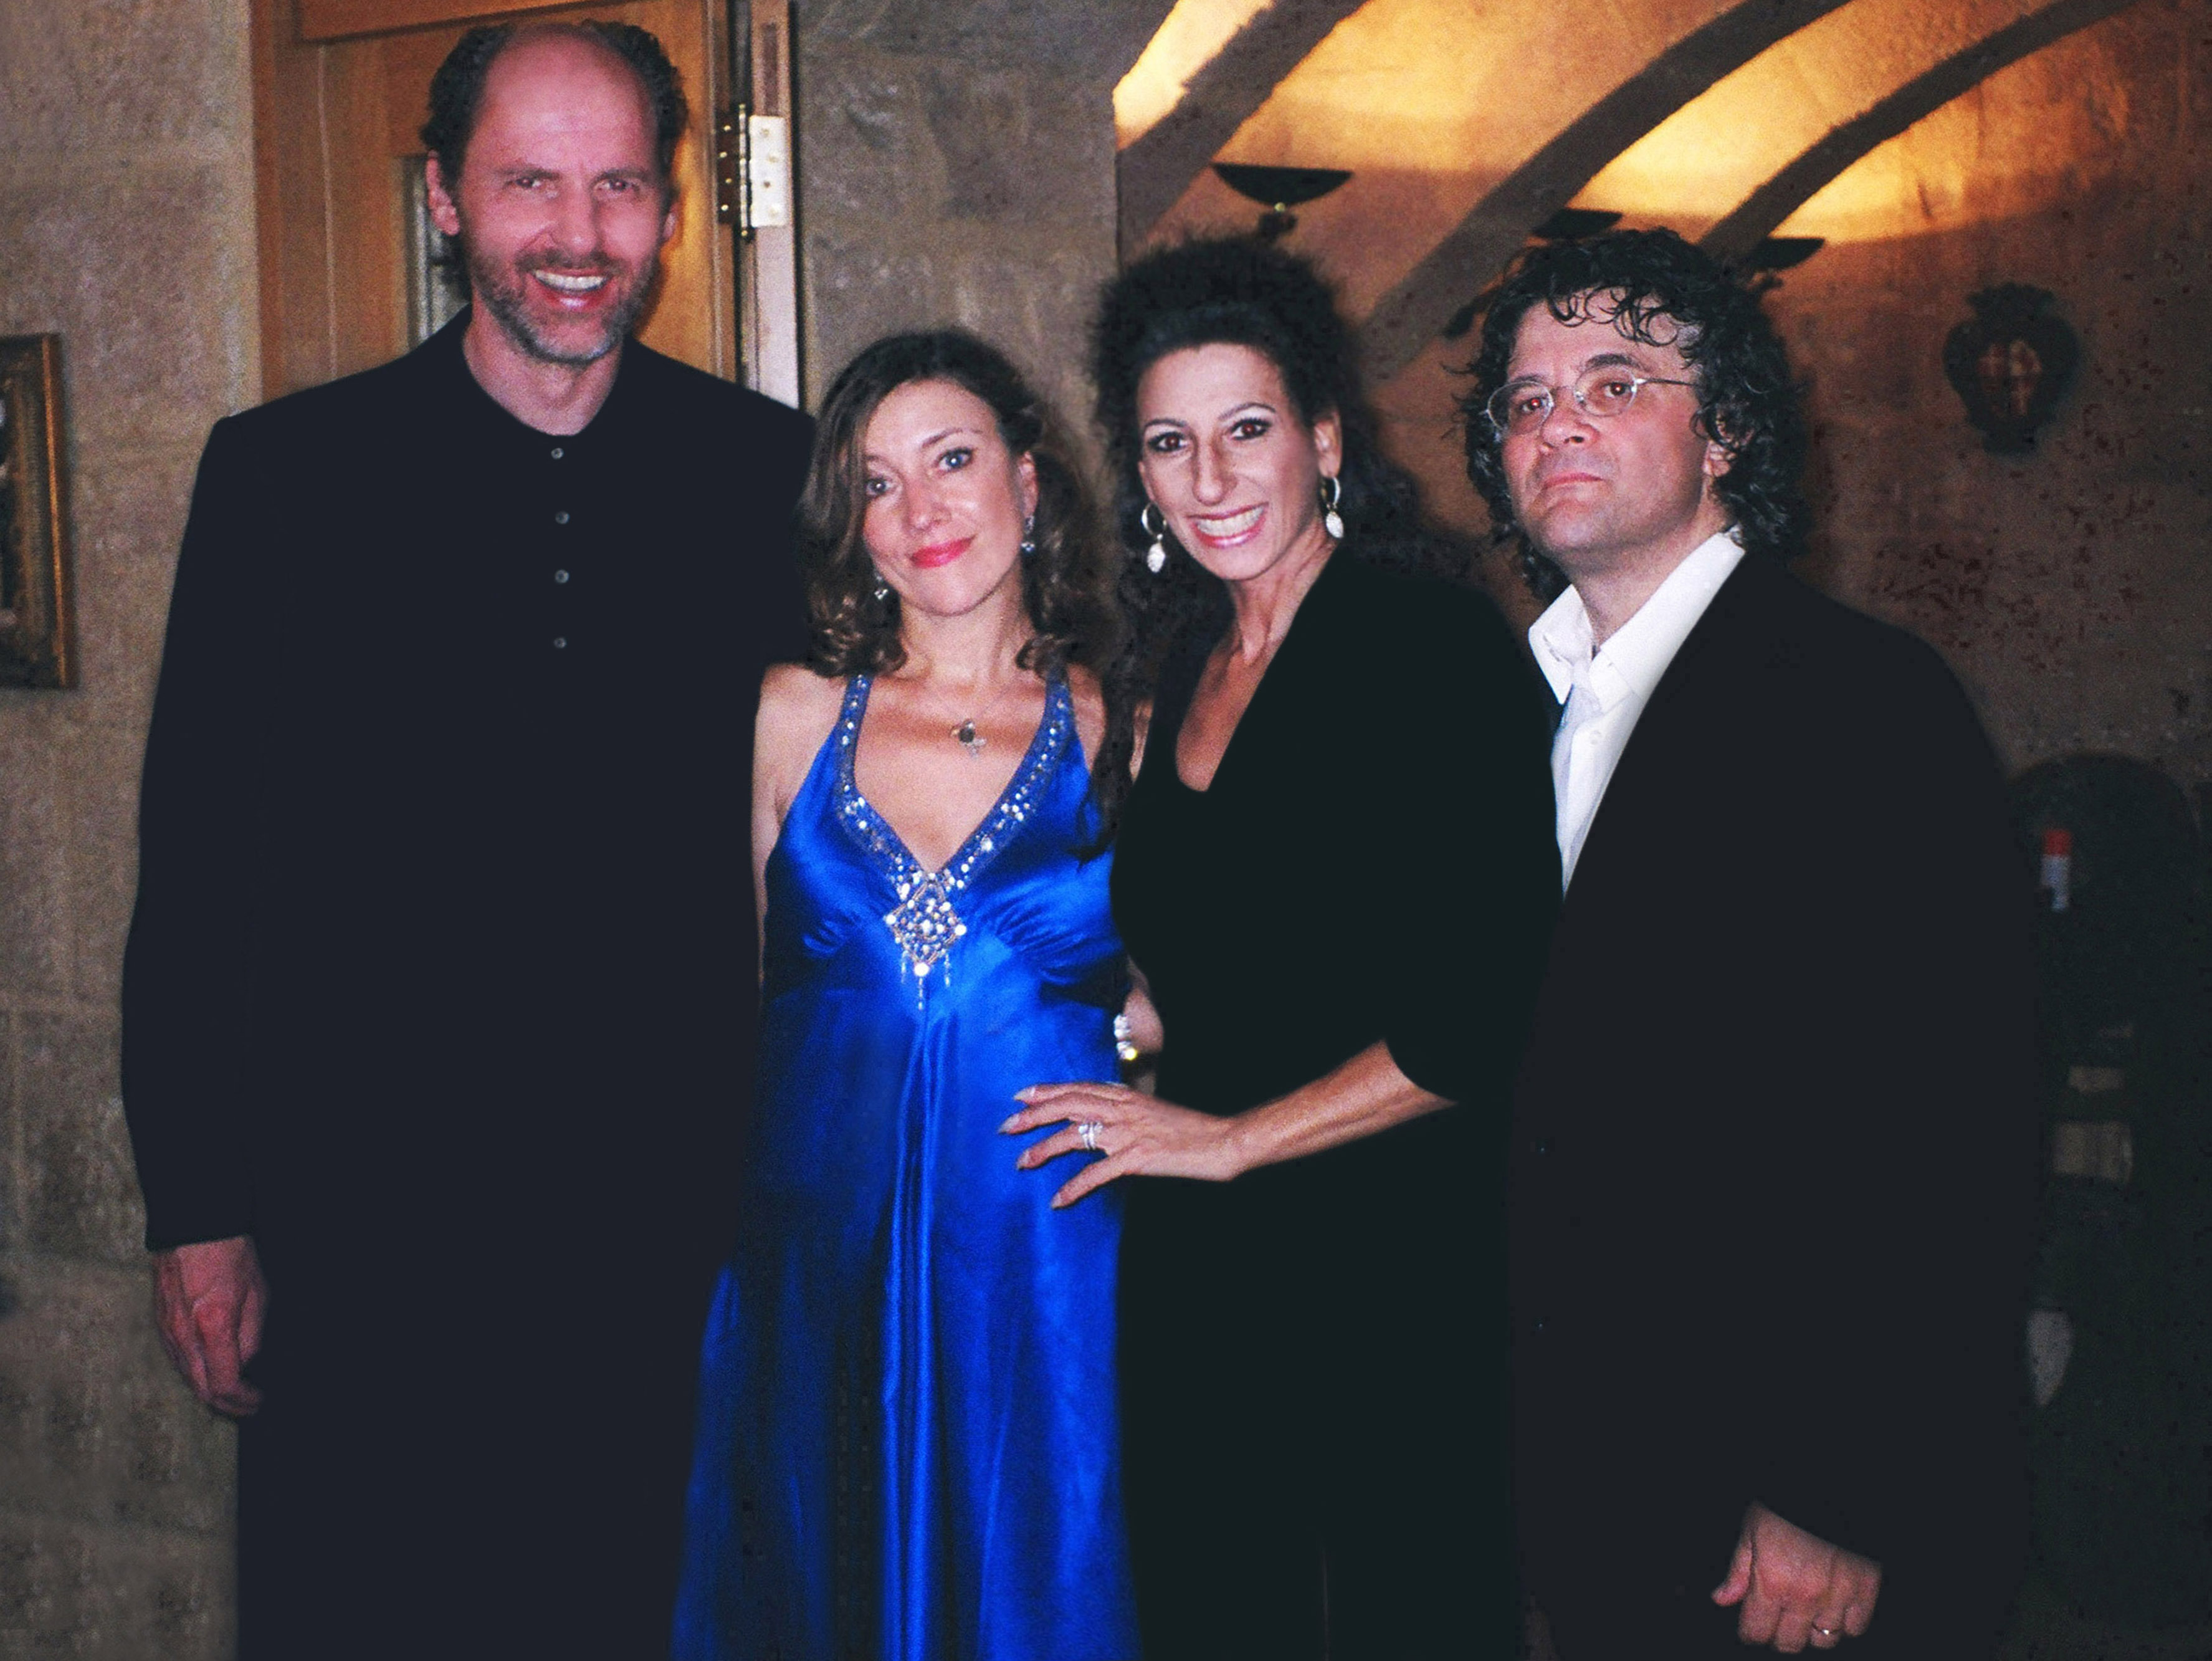 Lucia Aliberti with her Manager Dr.Stefan Schmerbeck and the conductor Brian Schembri with his wife⚘Gala Concert⚘Teatro Manoel⚘Malta⚘Official Party of the Maltese Parliament and the Italian Embassy⚘:http://www.luciaaliberti.it #luciaaliberti #brianschembri #stefanschmerbeck #teatromanoel #malta #italianembassy #malteseparliament #officialparty #armanifashion